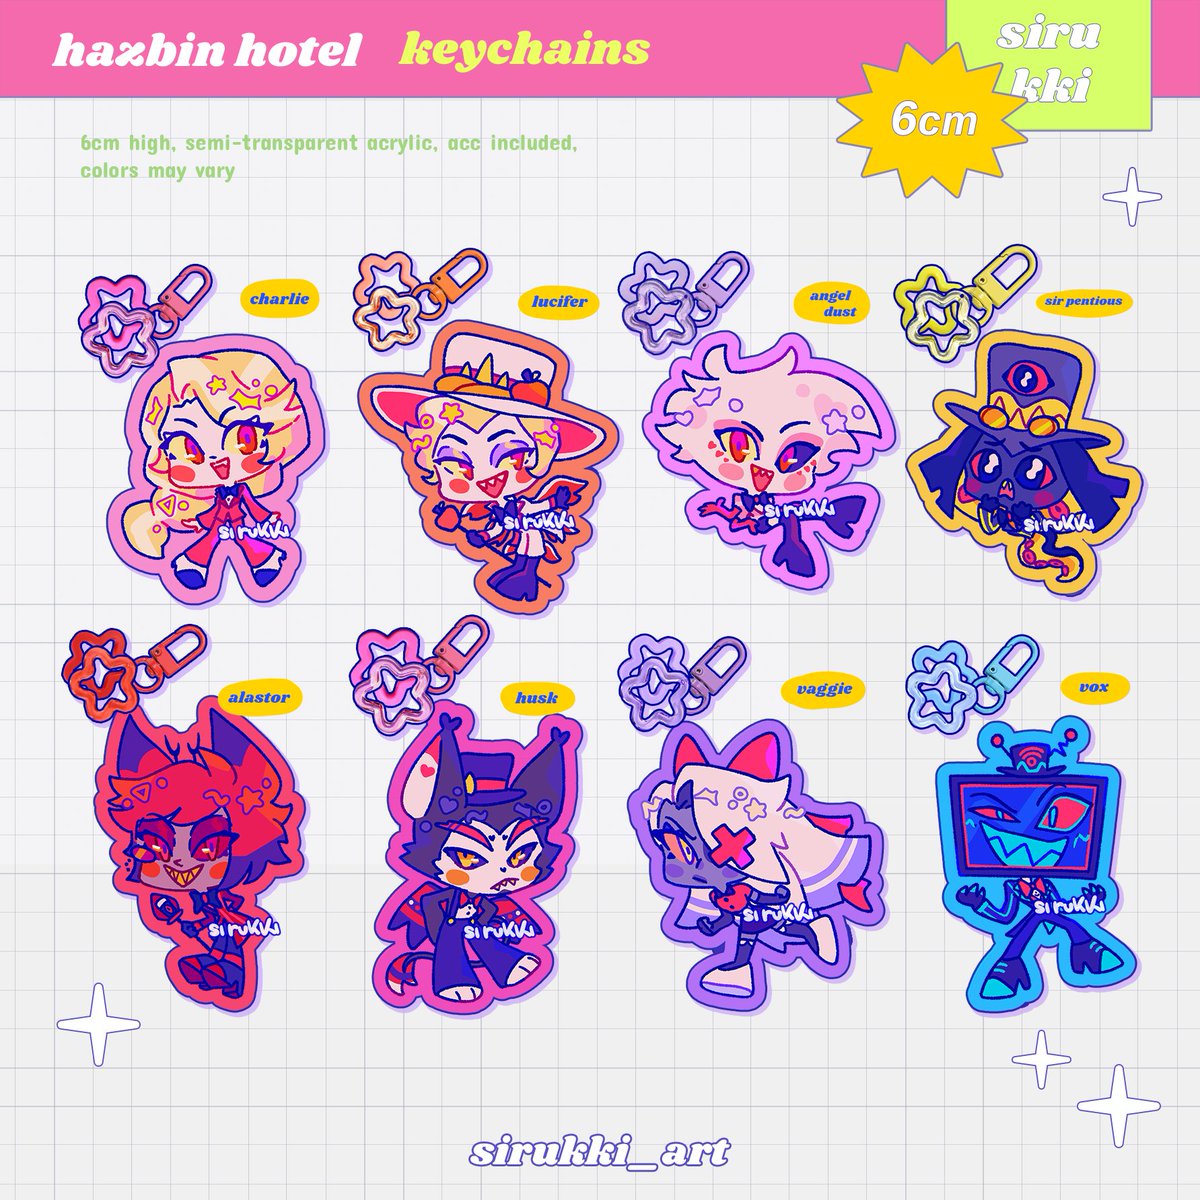 ✨💙🌟STORE OPENING DATE: 27th APRIL🌟💙✨
🌱New products!
🌱Heartsteel set avalaible in pre-order!
🌱Wordlwide~ 